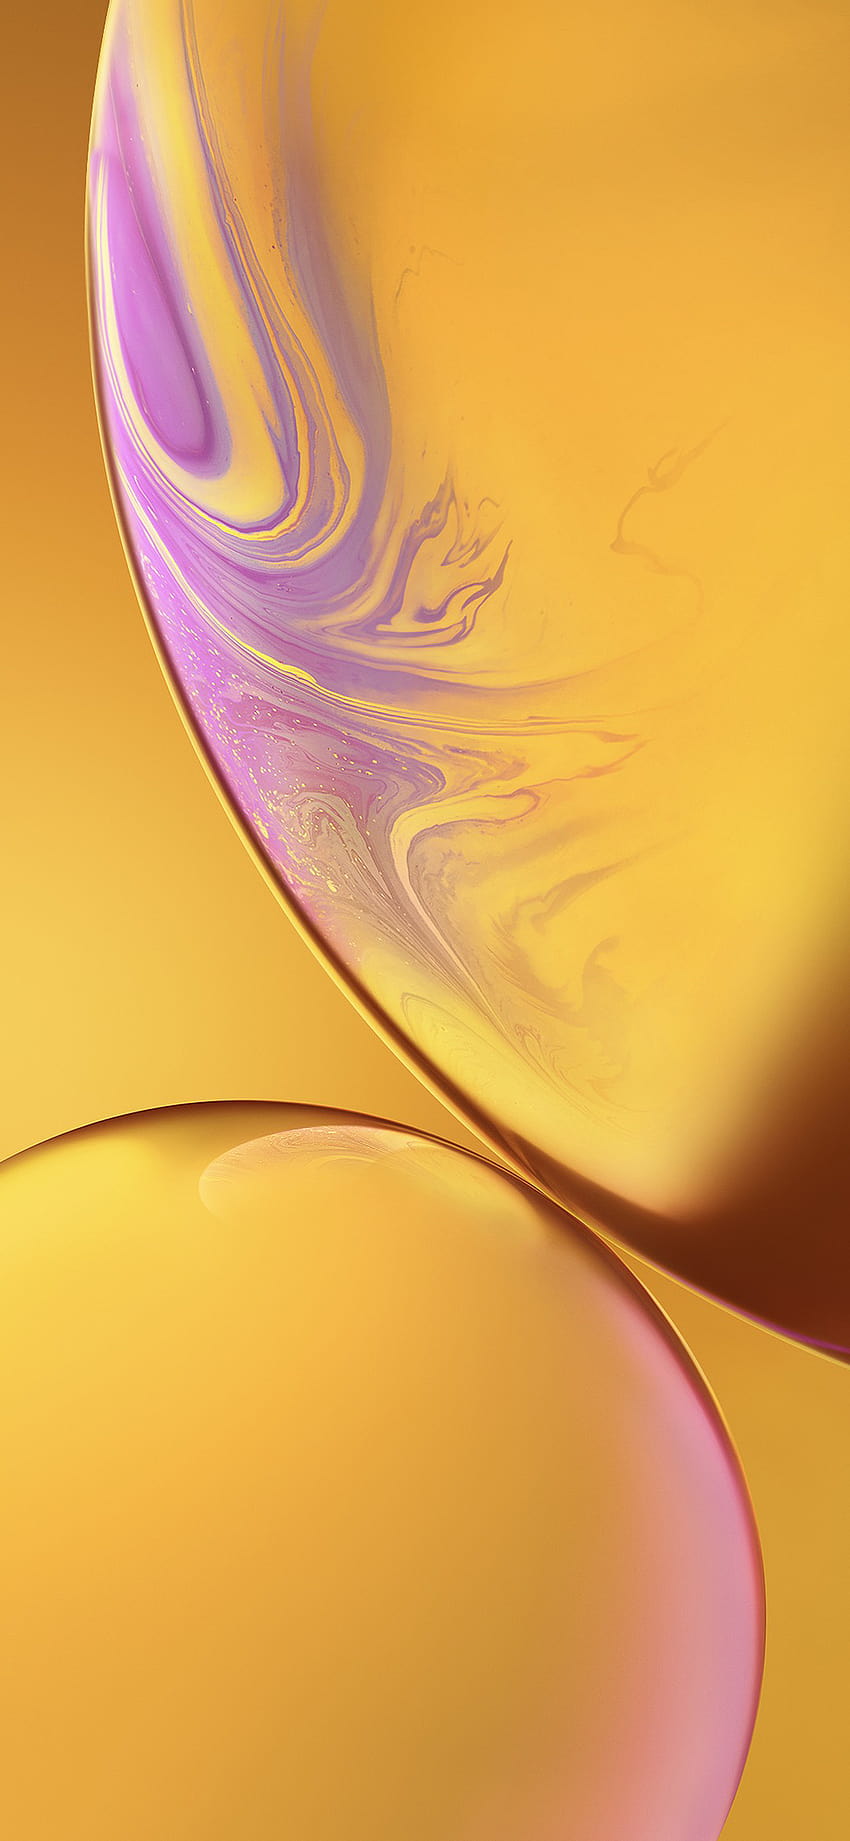 iPhone XR Stock, purple and yellow HD phone wallpaper